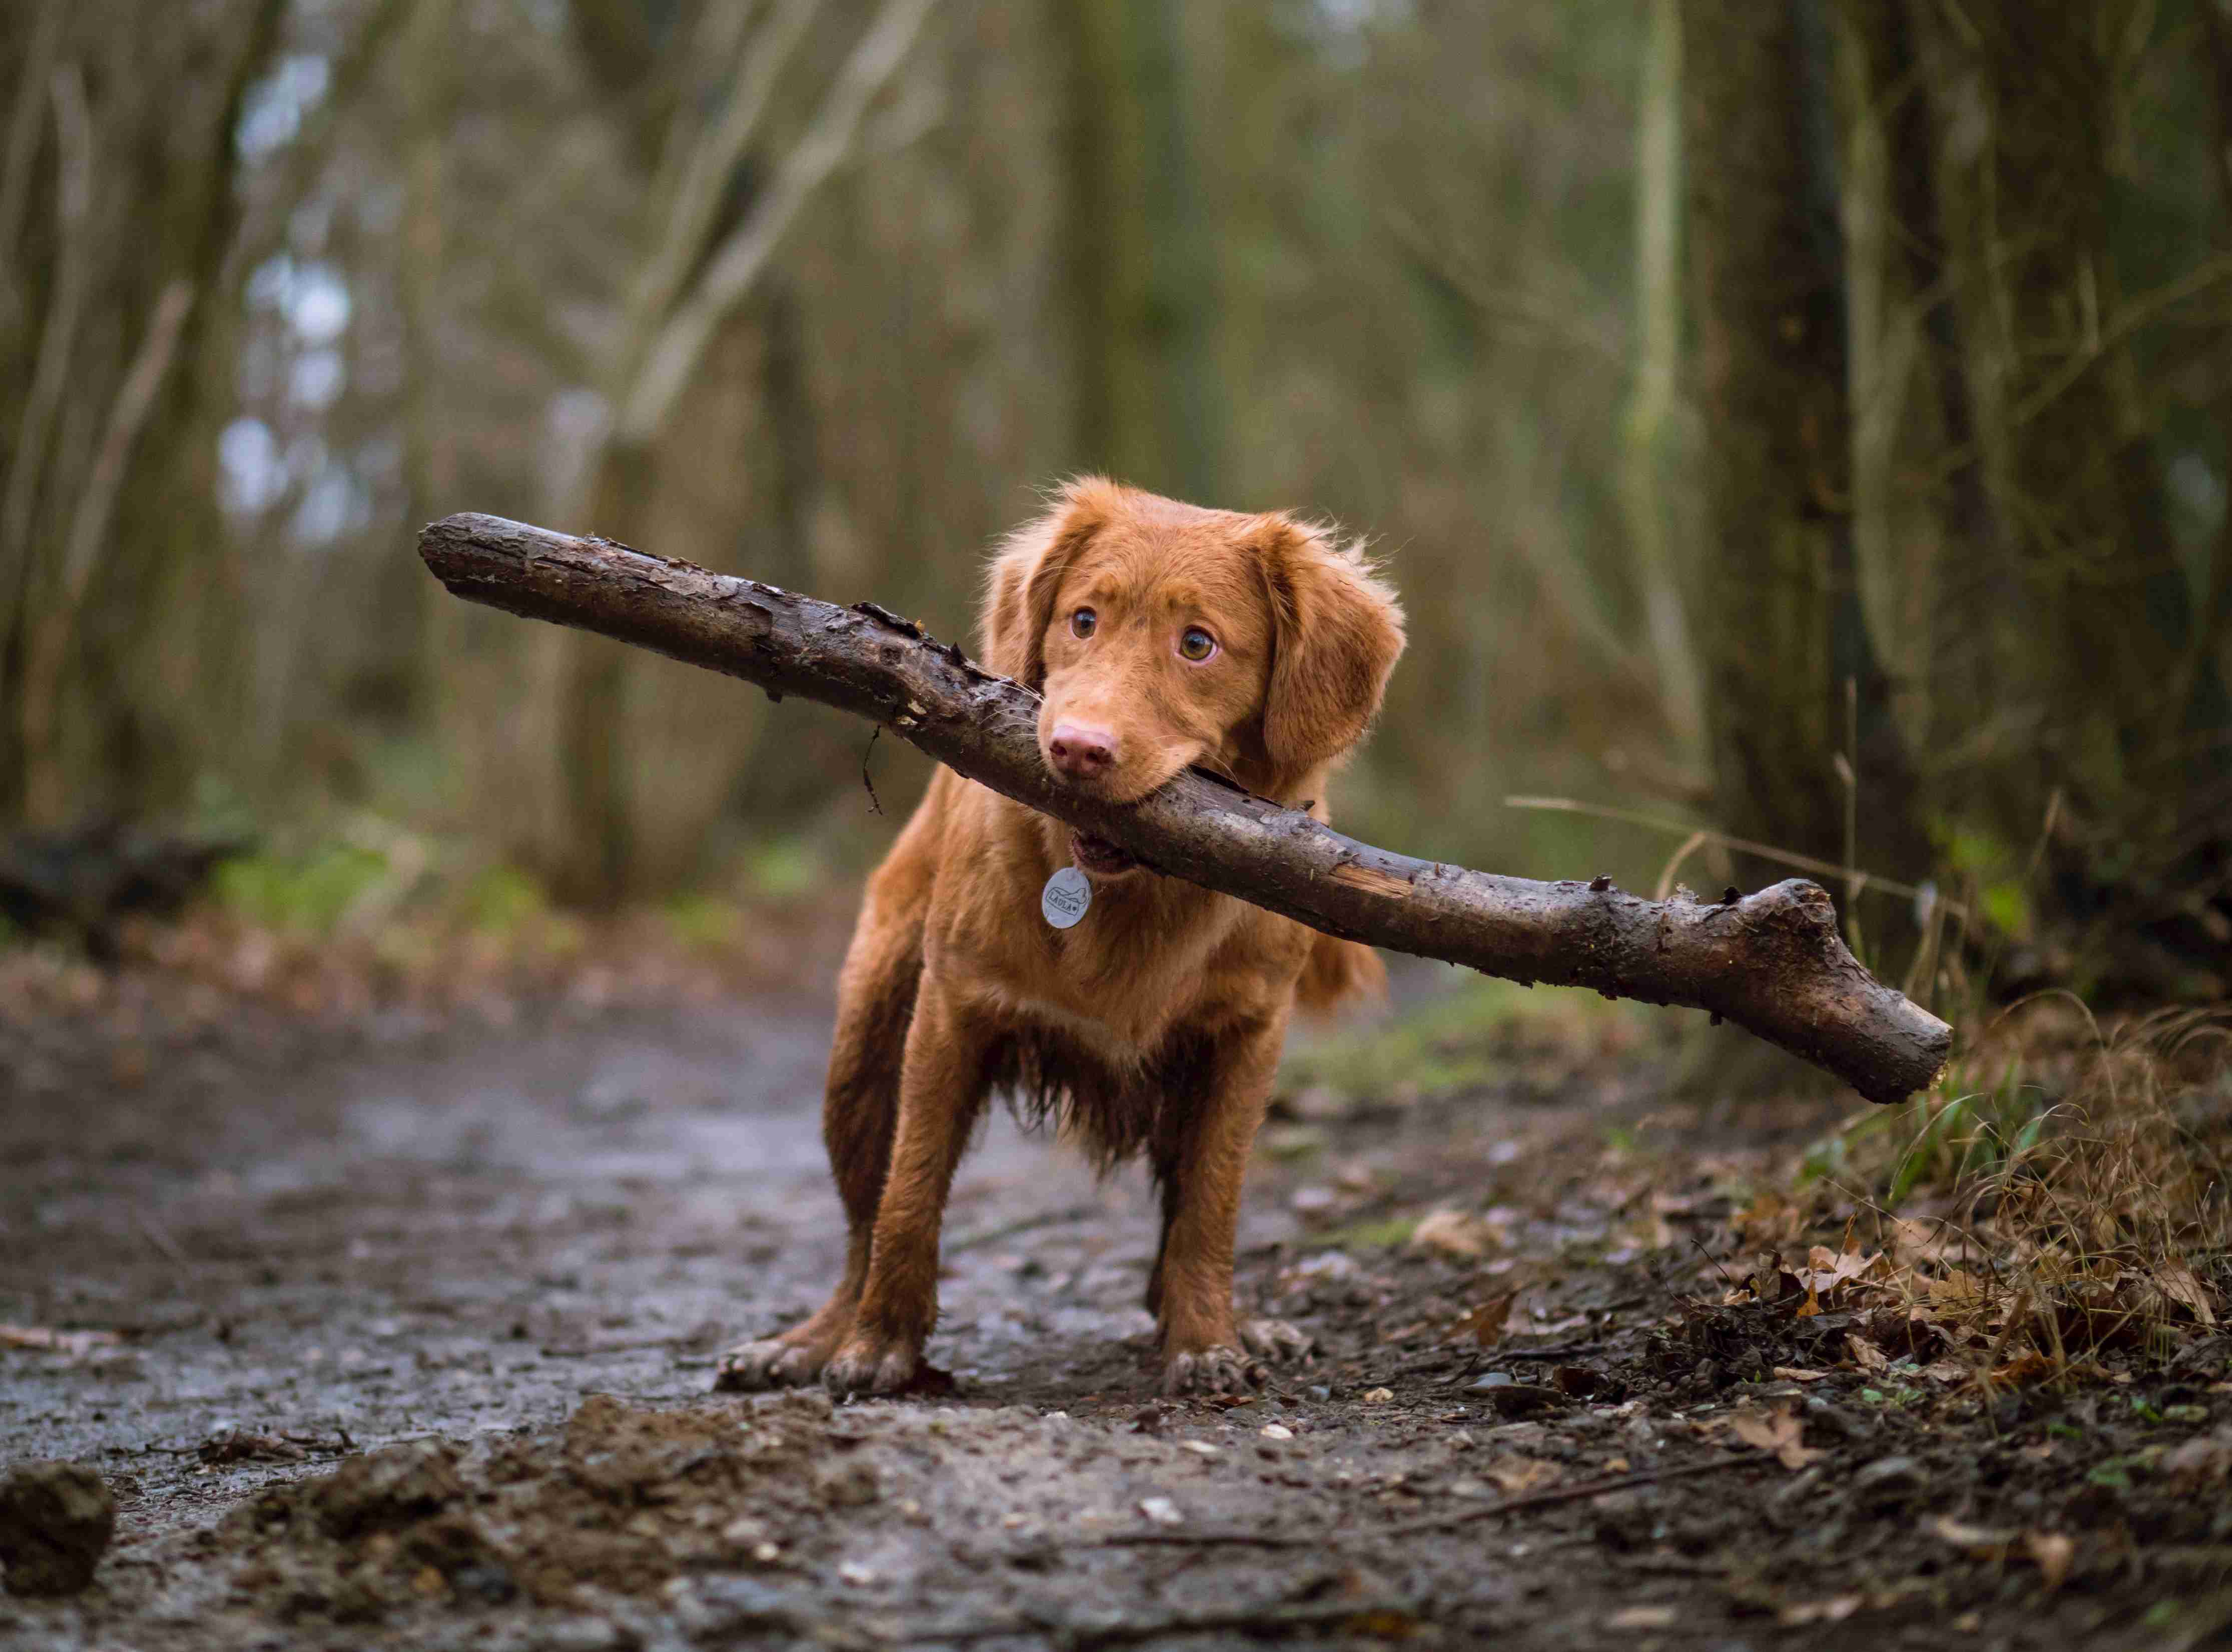 Can Golden Retrievers be trained to be search and rescue dogs?